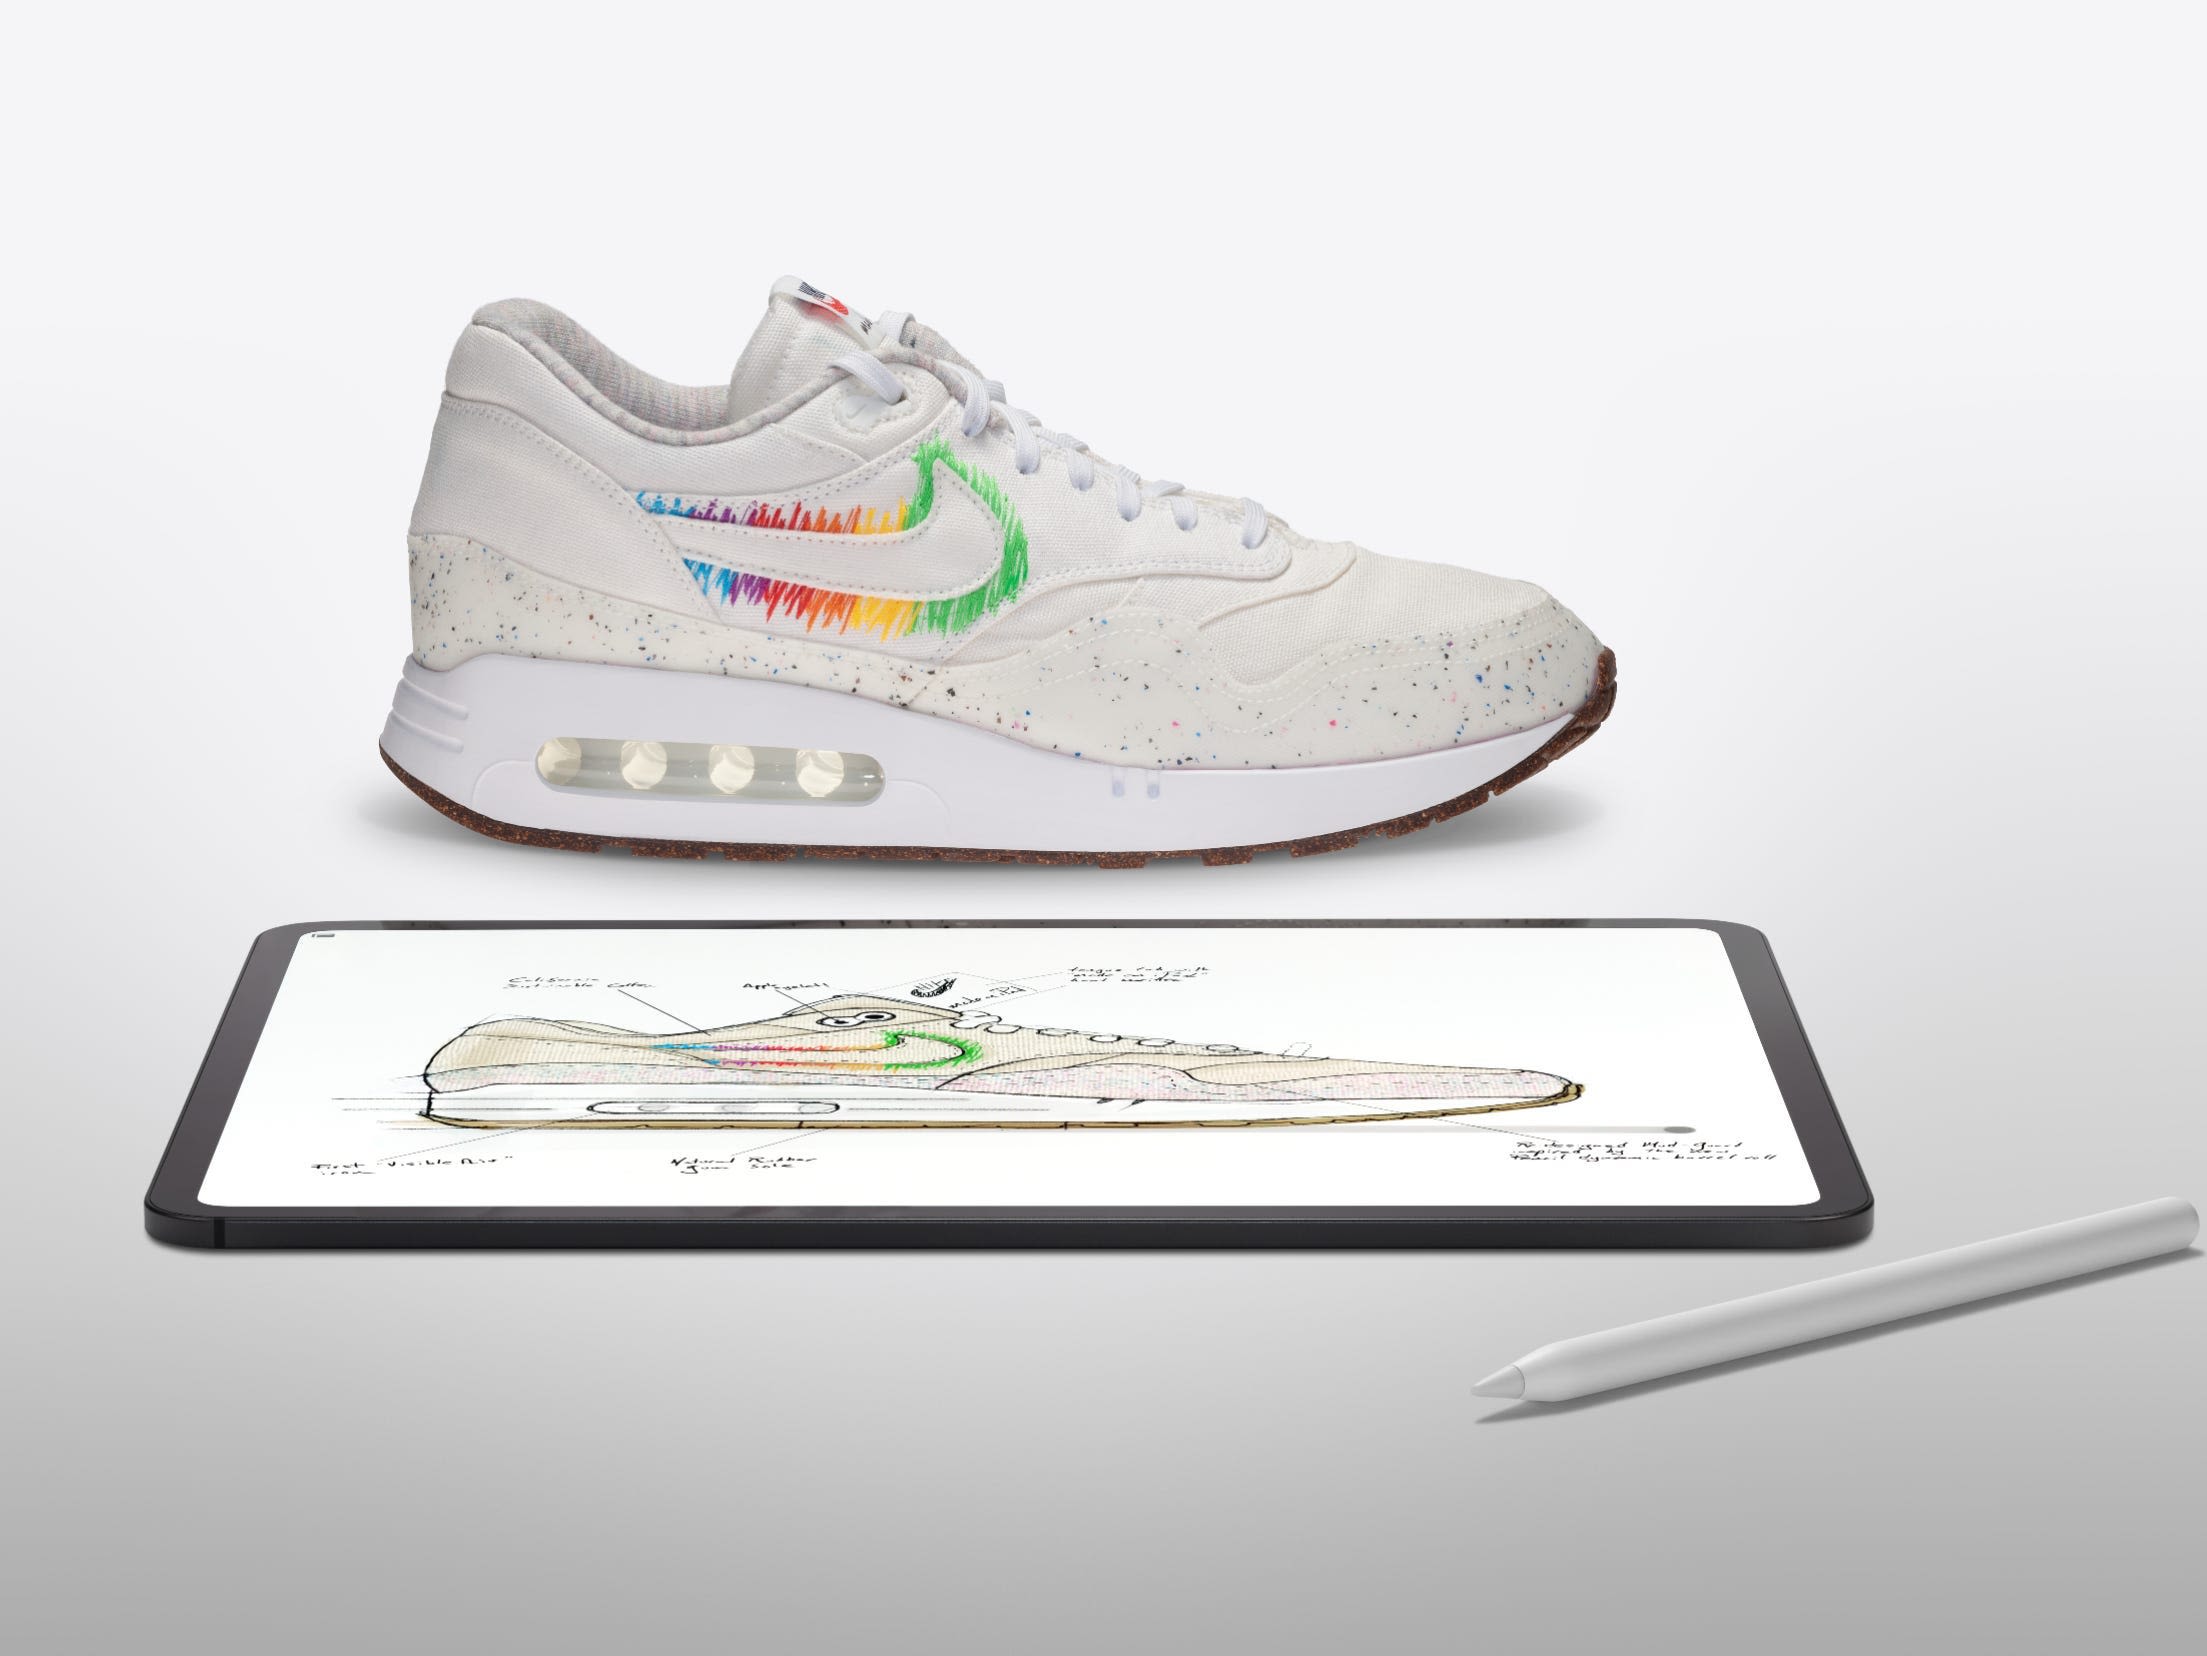 Tim Cook wore one-of-a-kind Nike Air Max 1 sneakers entirely designed on an iPad during an Apple product launch